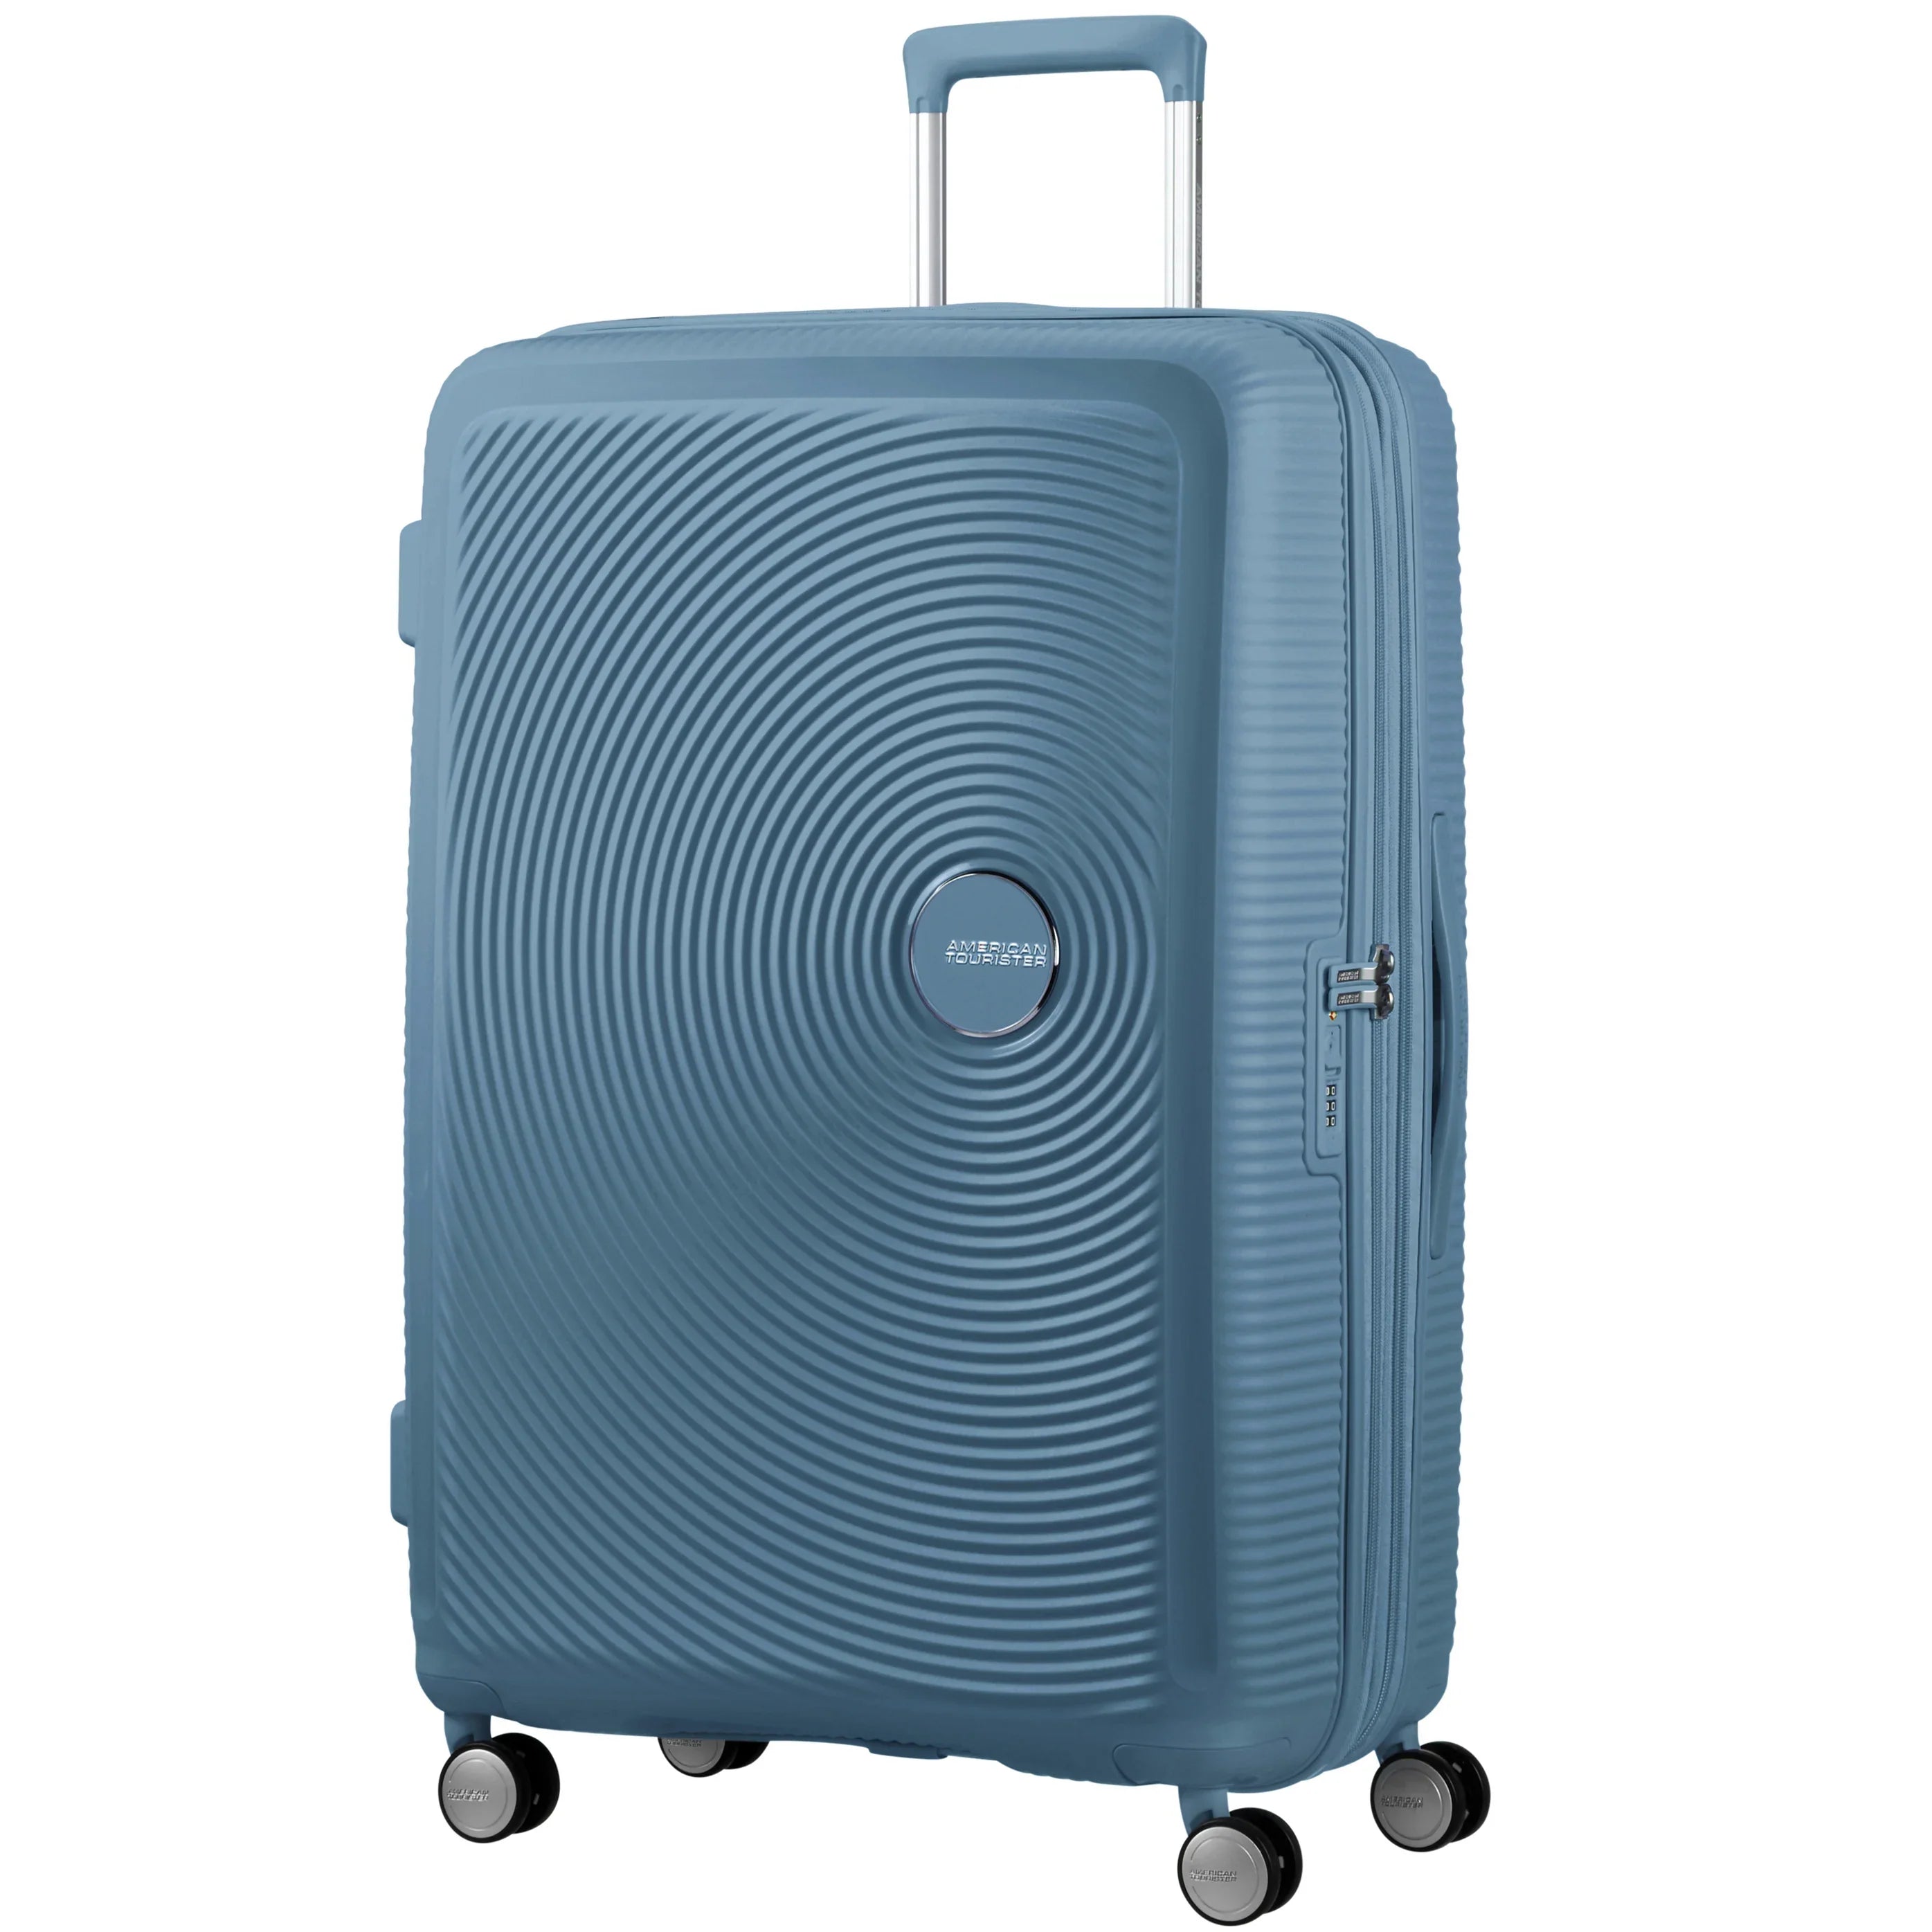 American Tourister Koffer Trolleys 